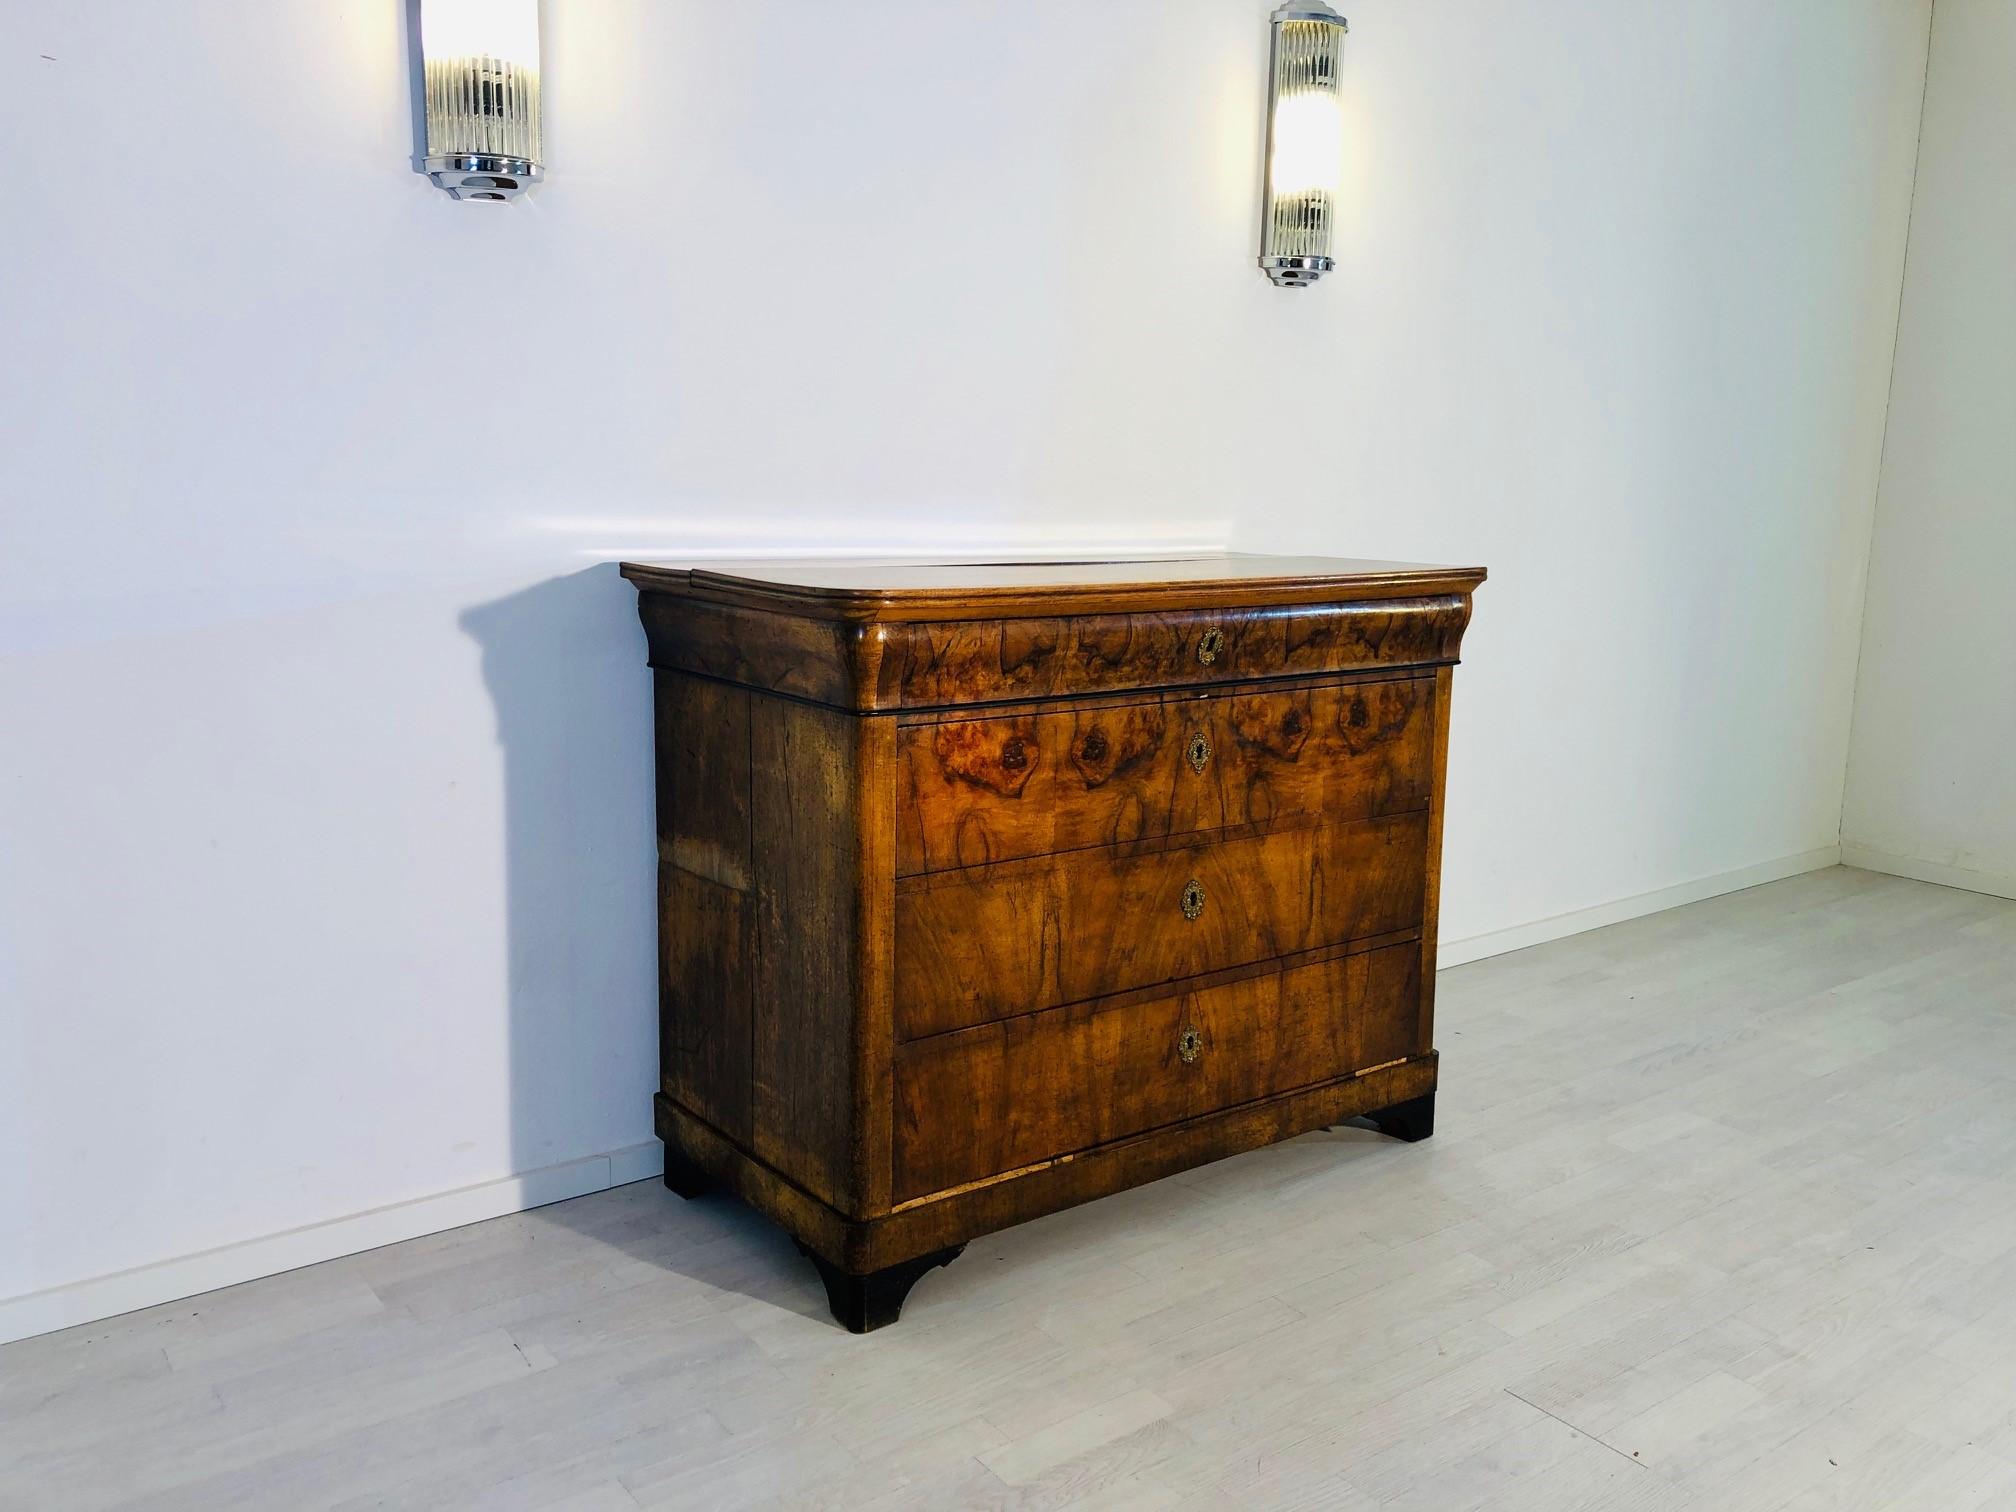 Noble Biedermeier commode or chest of drawers with three large and one small drawer for storage considerations. Features an elegantly made and carefully selected walnut grain / veneer picture which extends over all three drawers. All drawers come